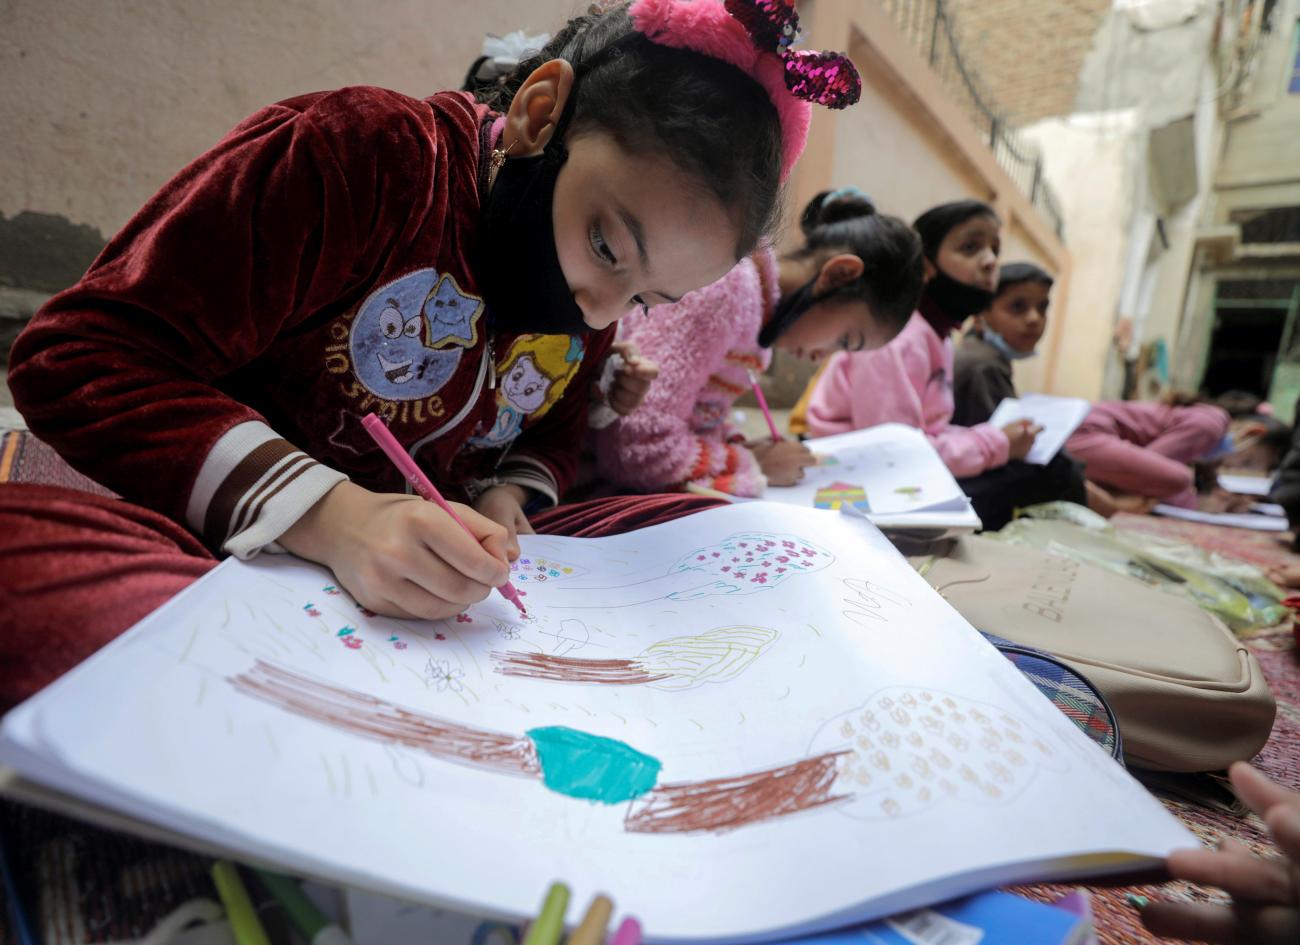 A girl attends class in Dakahlia province, Egypt on February 7, 2021.